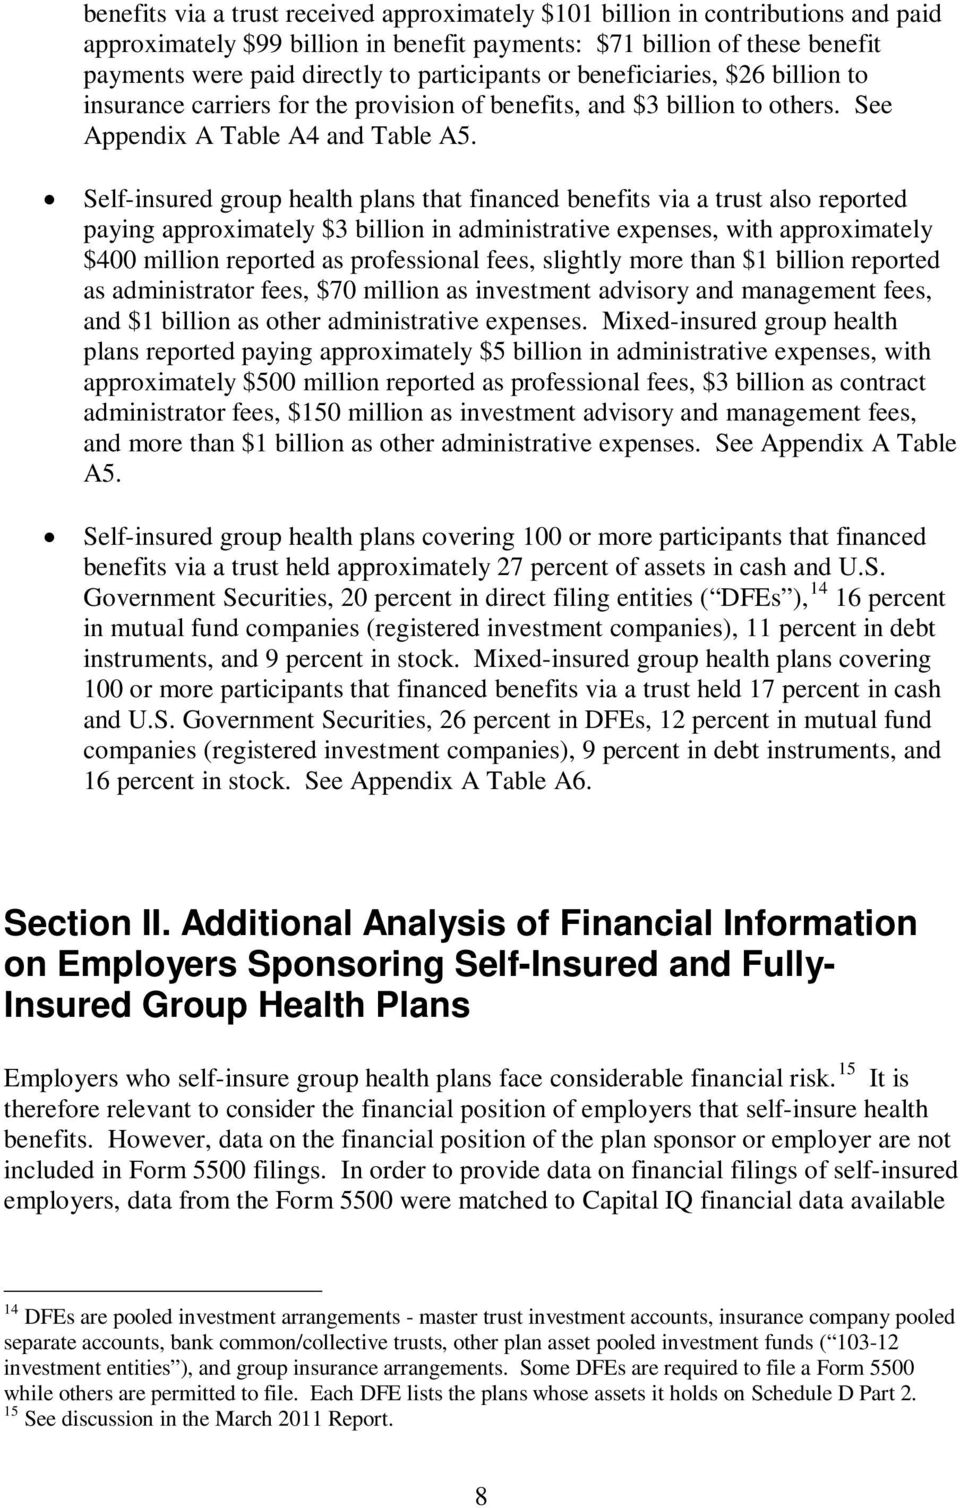 Self-insured group health plans that financed benefits via a trust also reported paying approximately $3 billion in administrative expenses, with approximately $400 million reported as professional